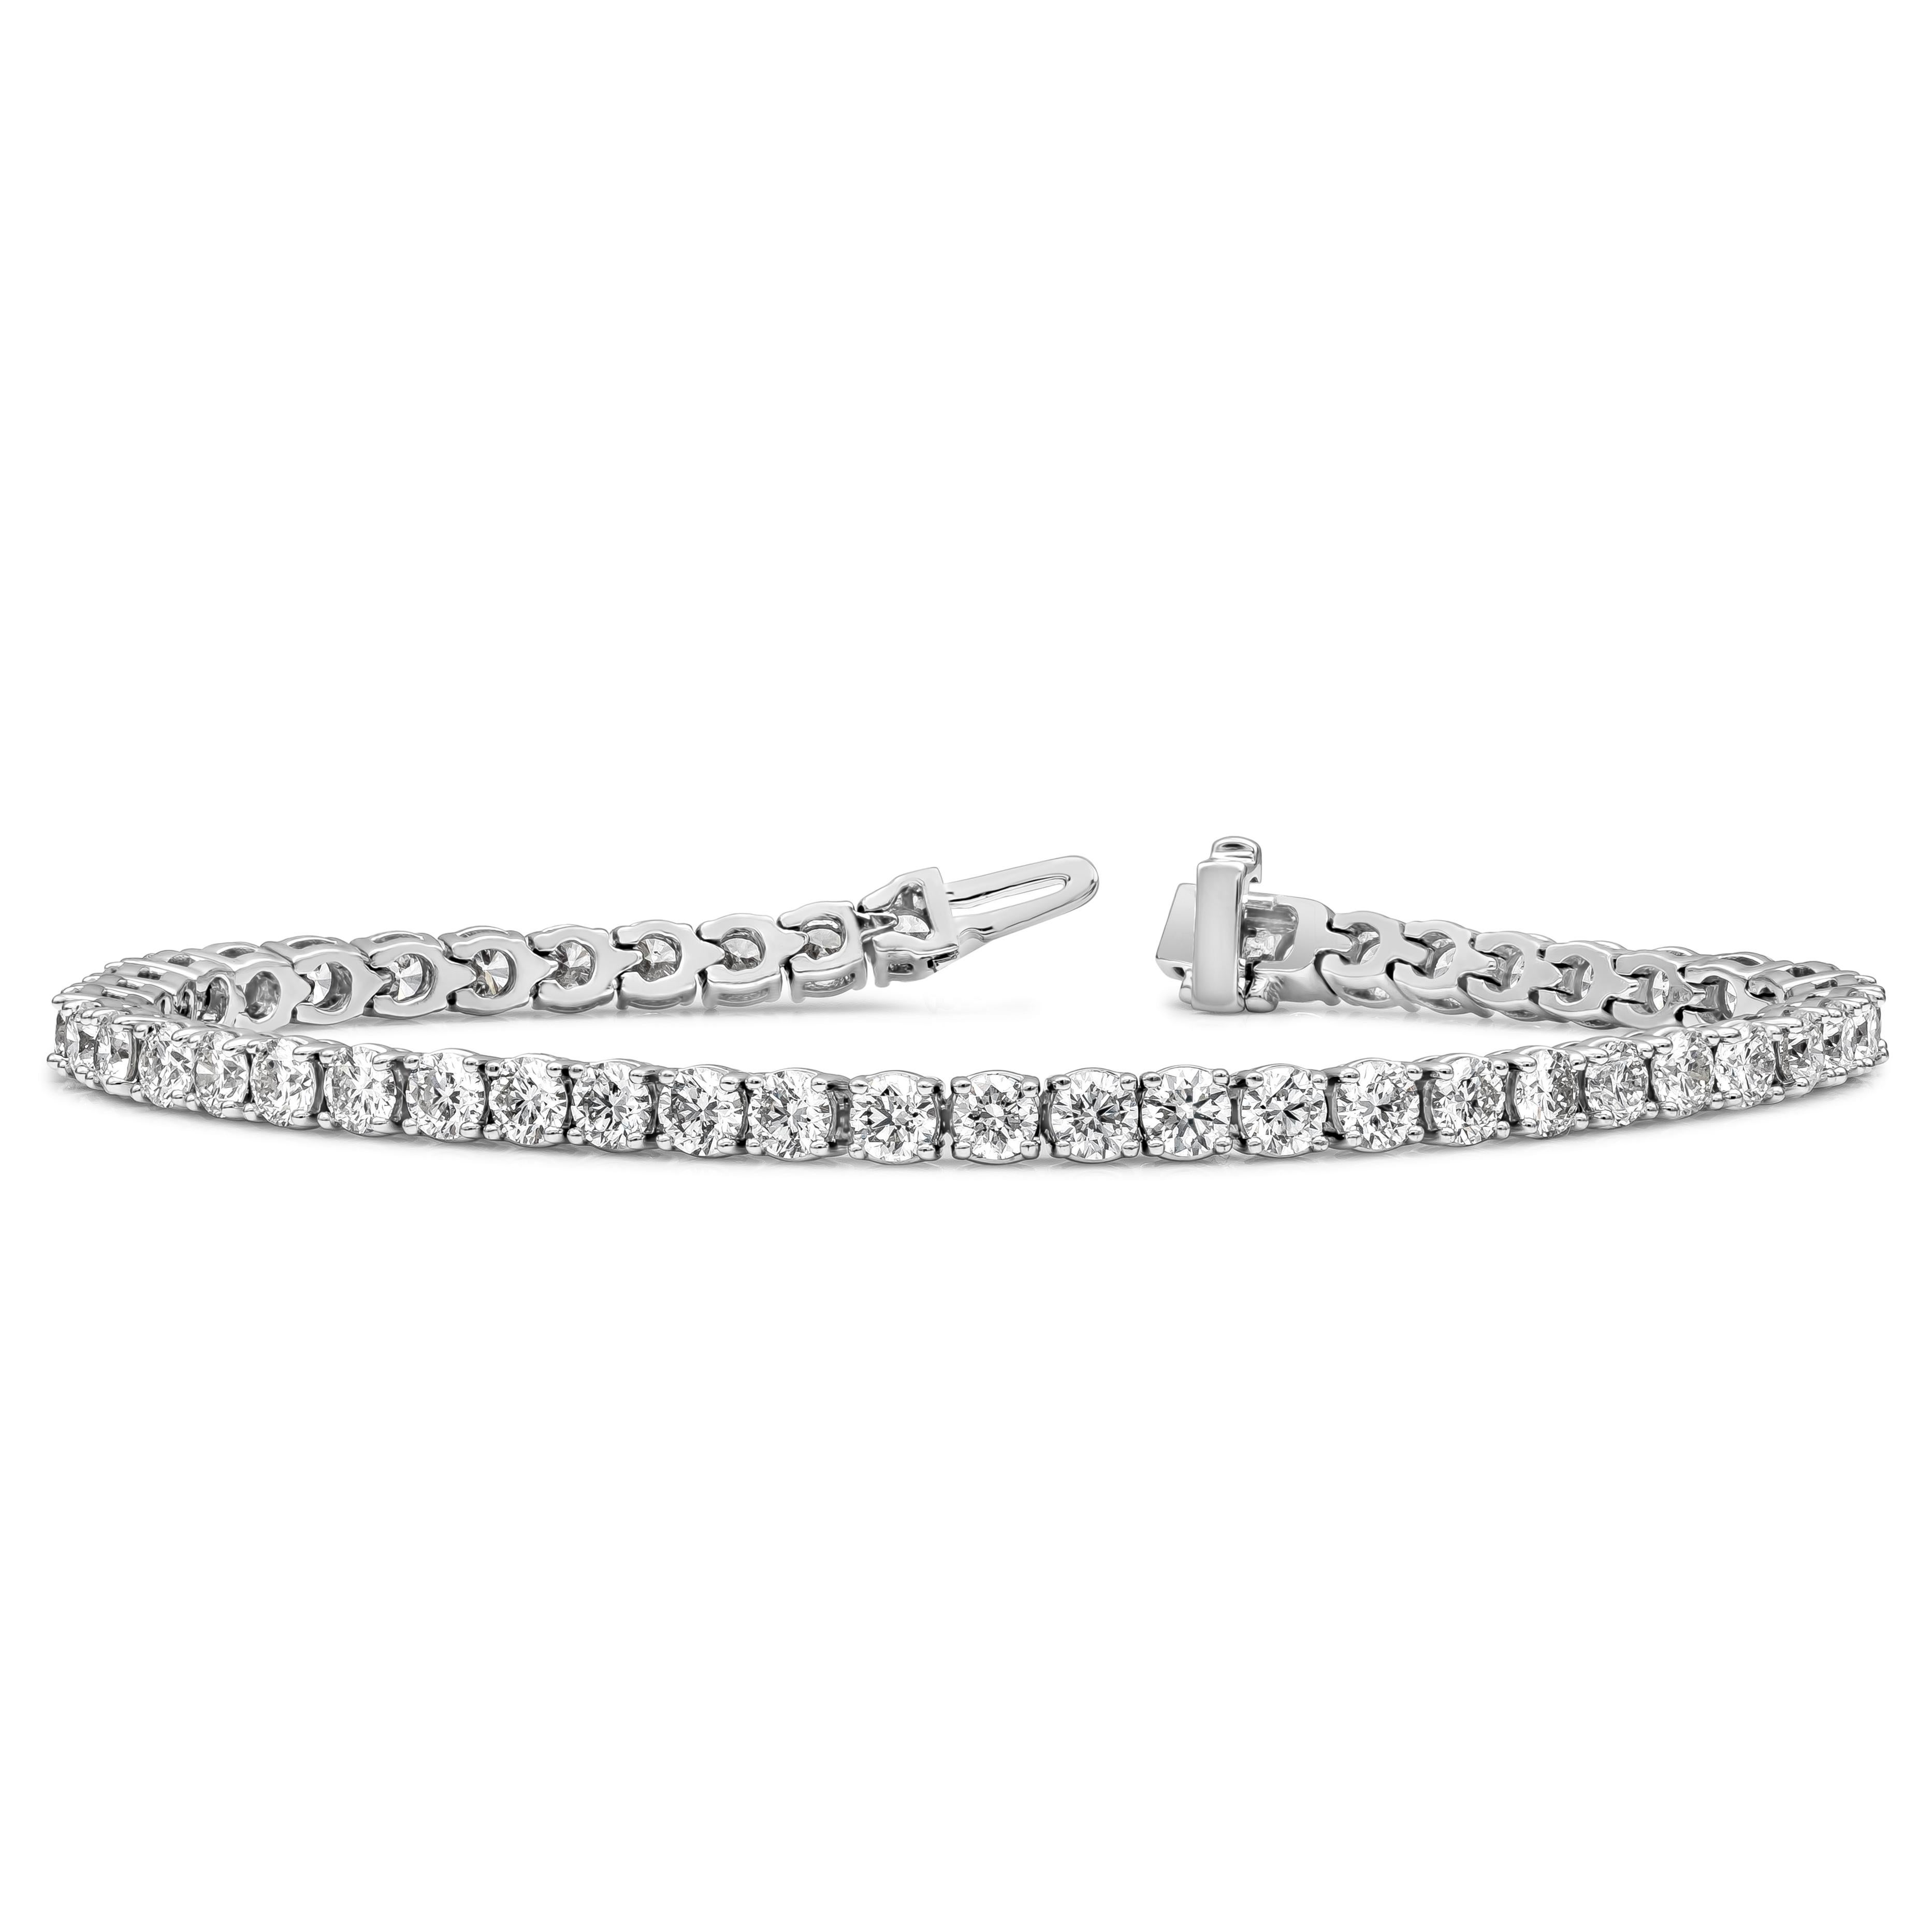 A classic tennis bracelet style showcasing 48 round brilliant diamonds, Diamonds weigh 8.02 carats total and are approximately F color, SI clarity. Set in a polished 14K White Gold 

Roman Malakov is a custom house, specializing in creating anything